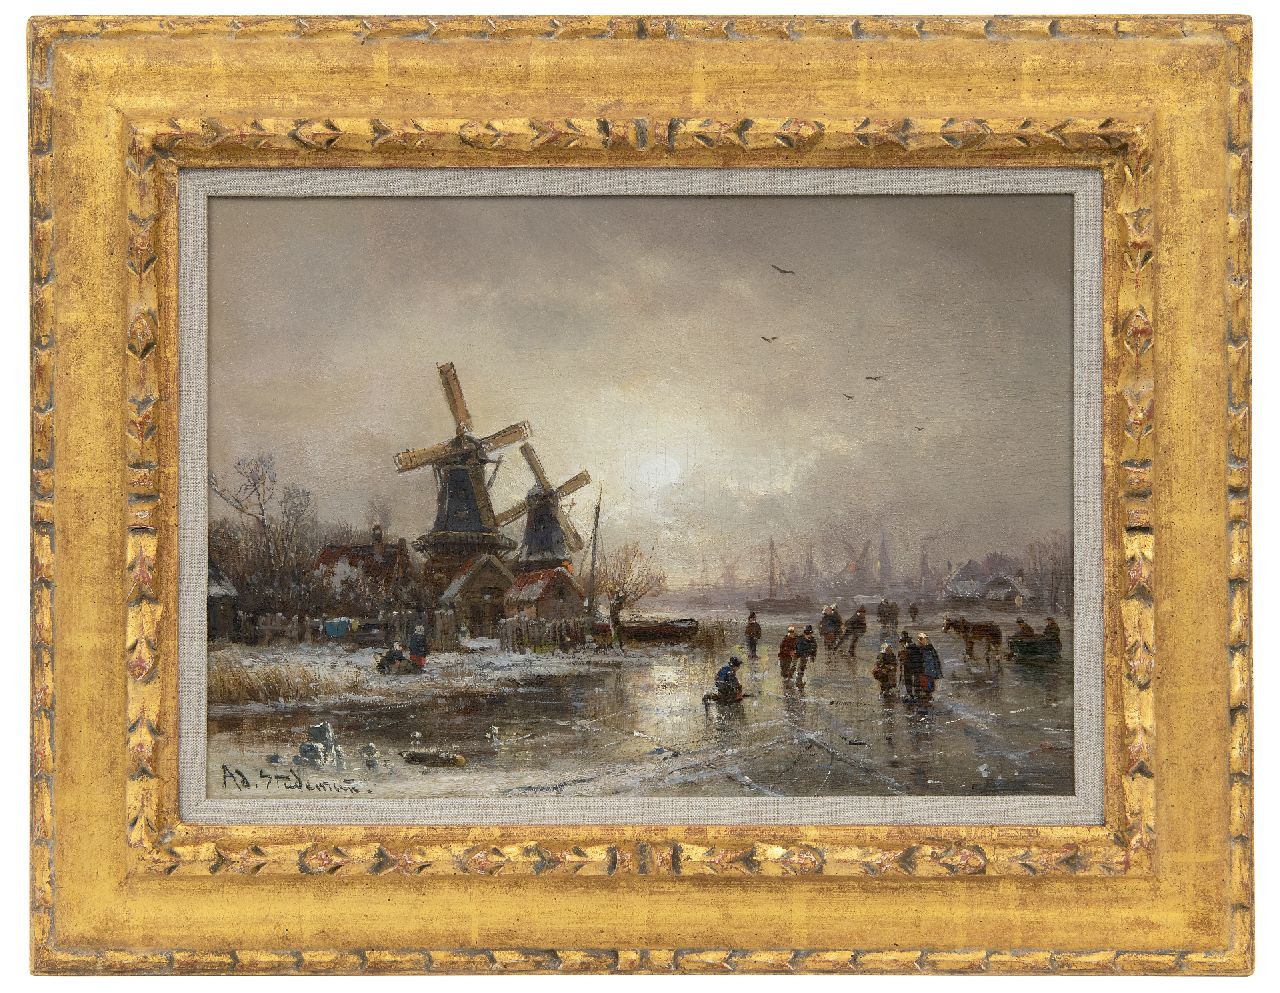 Stademann A.  | Adolf Stademann | Paintings offered for sale | Winter pleasures on ice, oil on panel 28.1 x 39.9 cm, signed l.l.